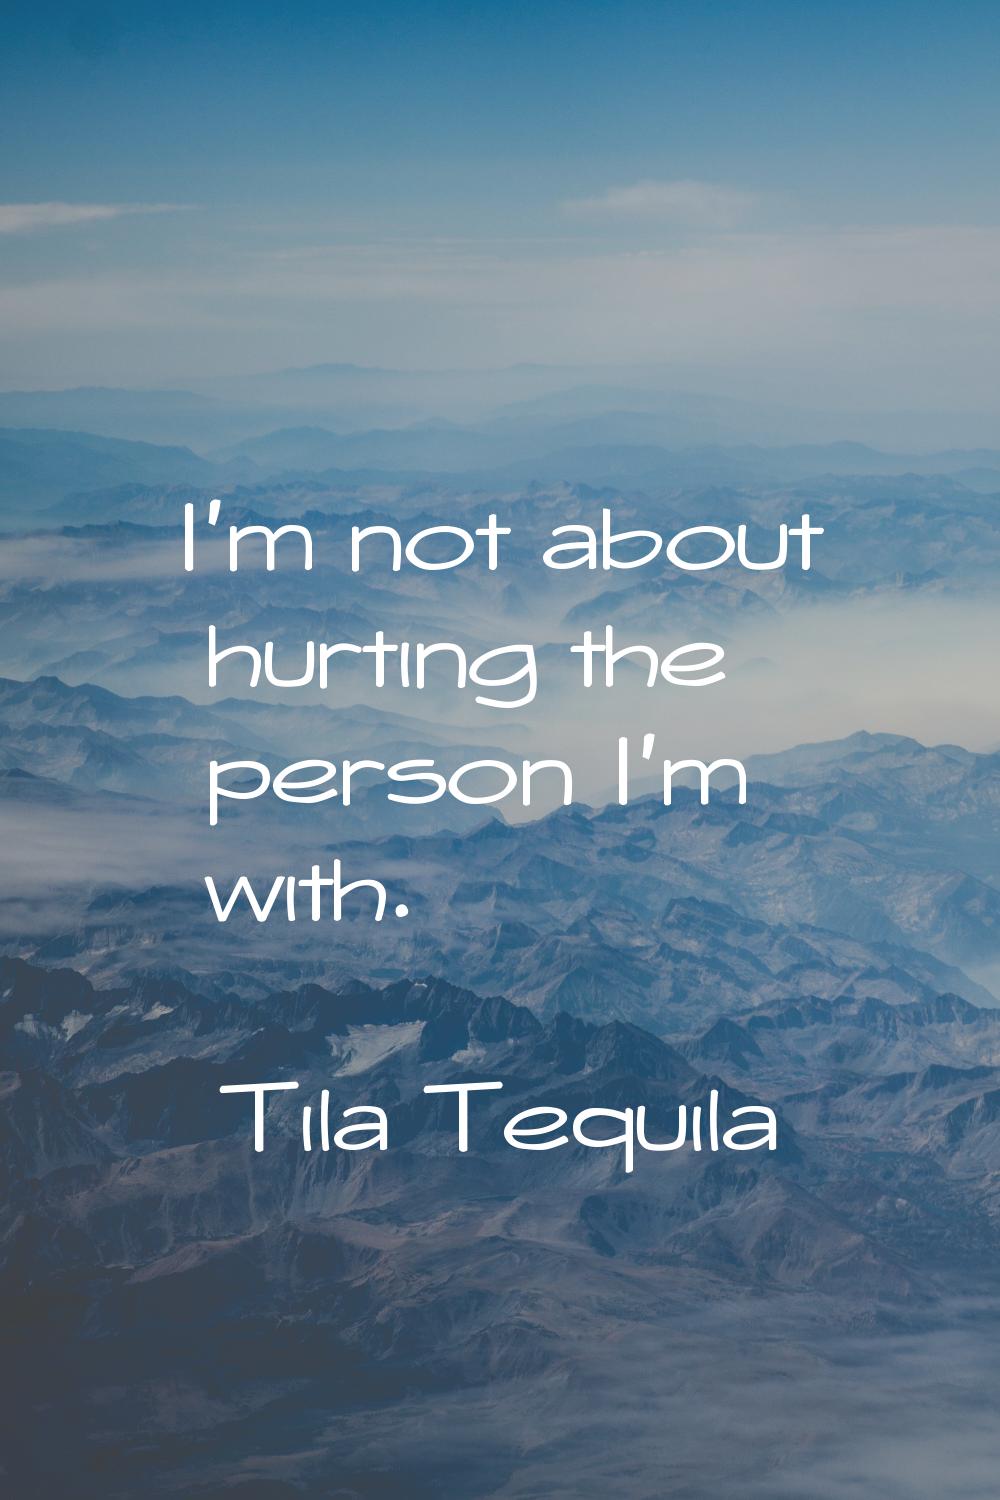 I'm not about hurting the person I'm with.